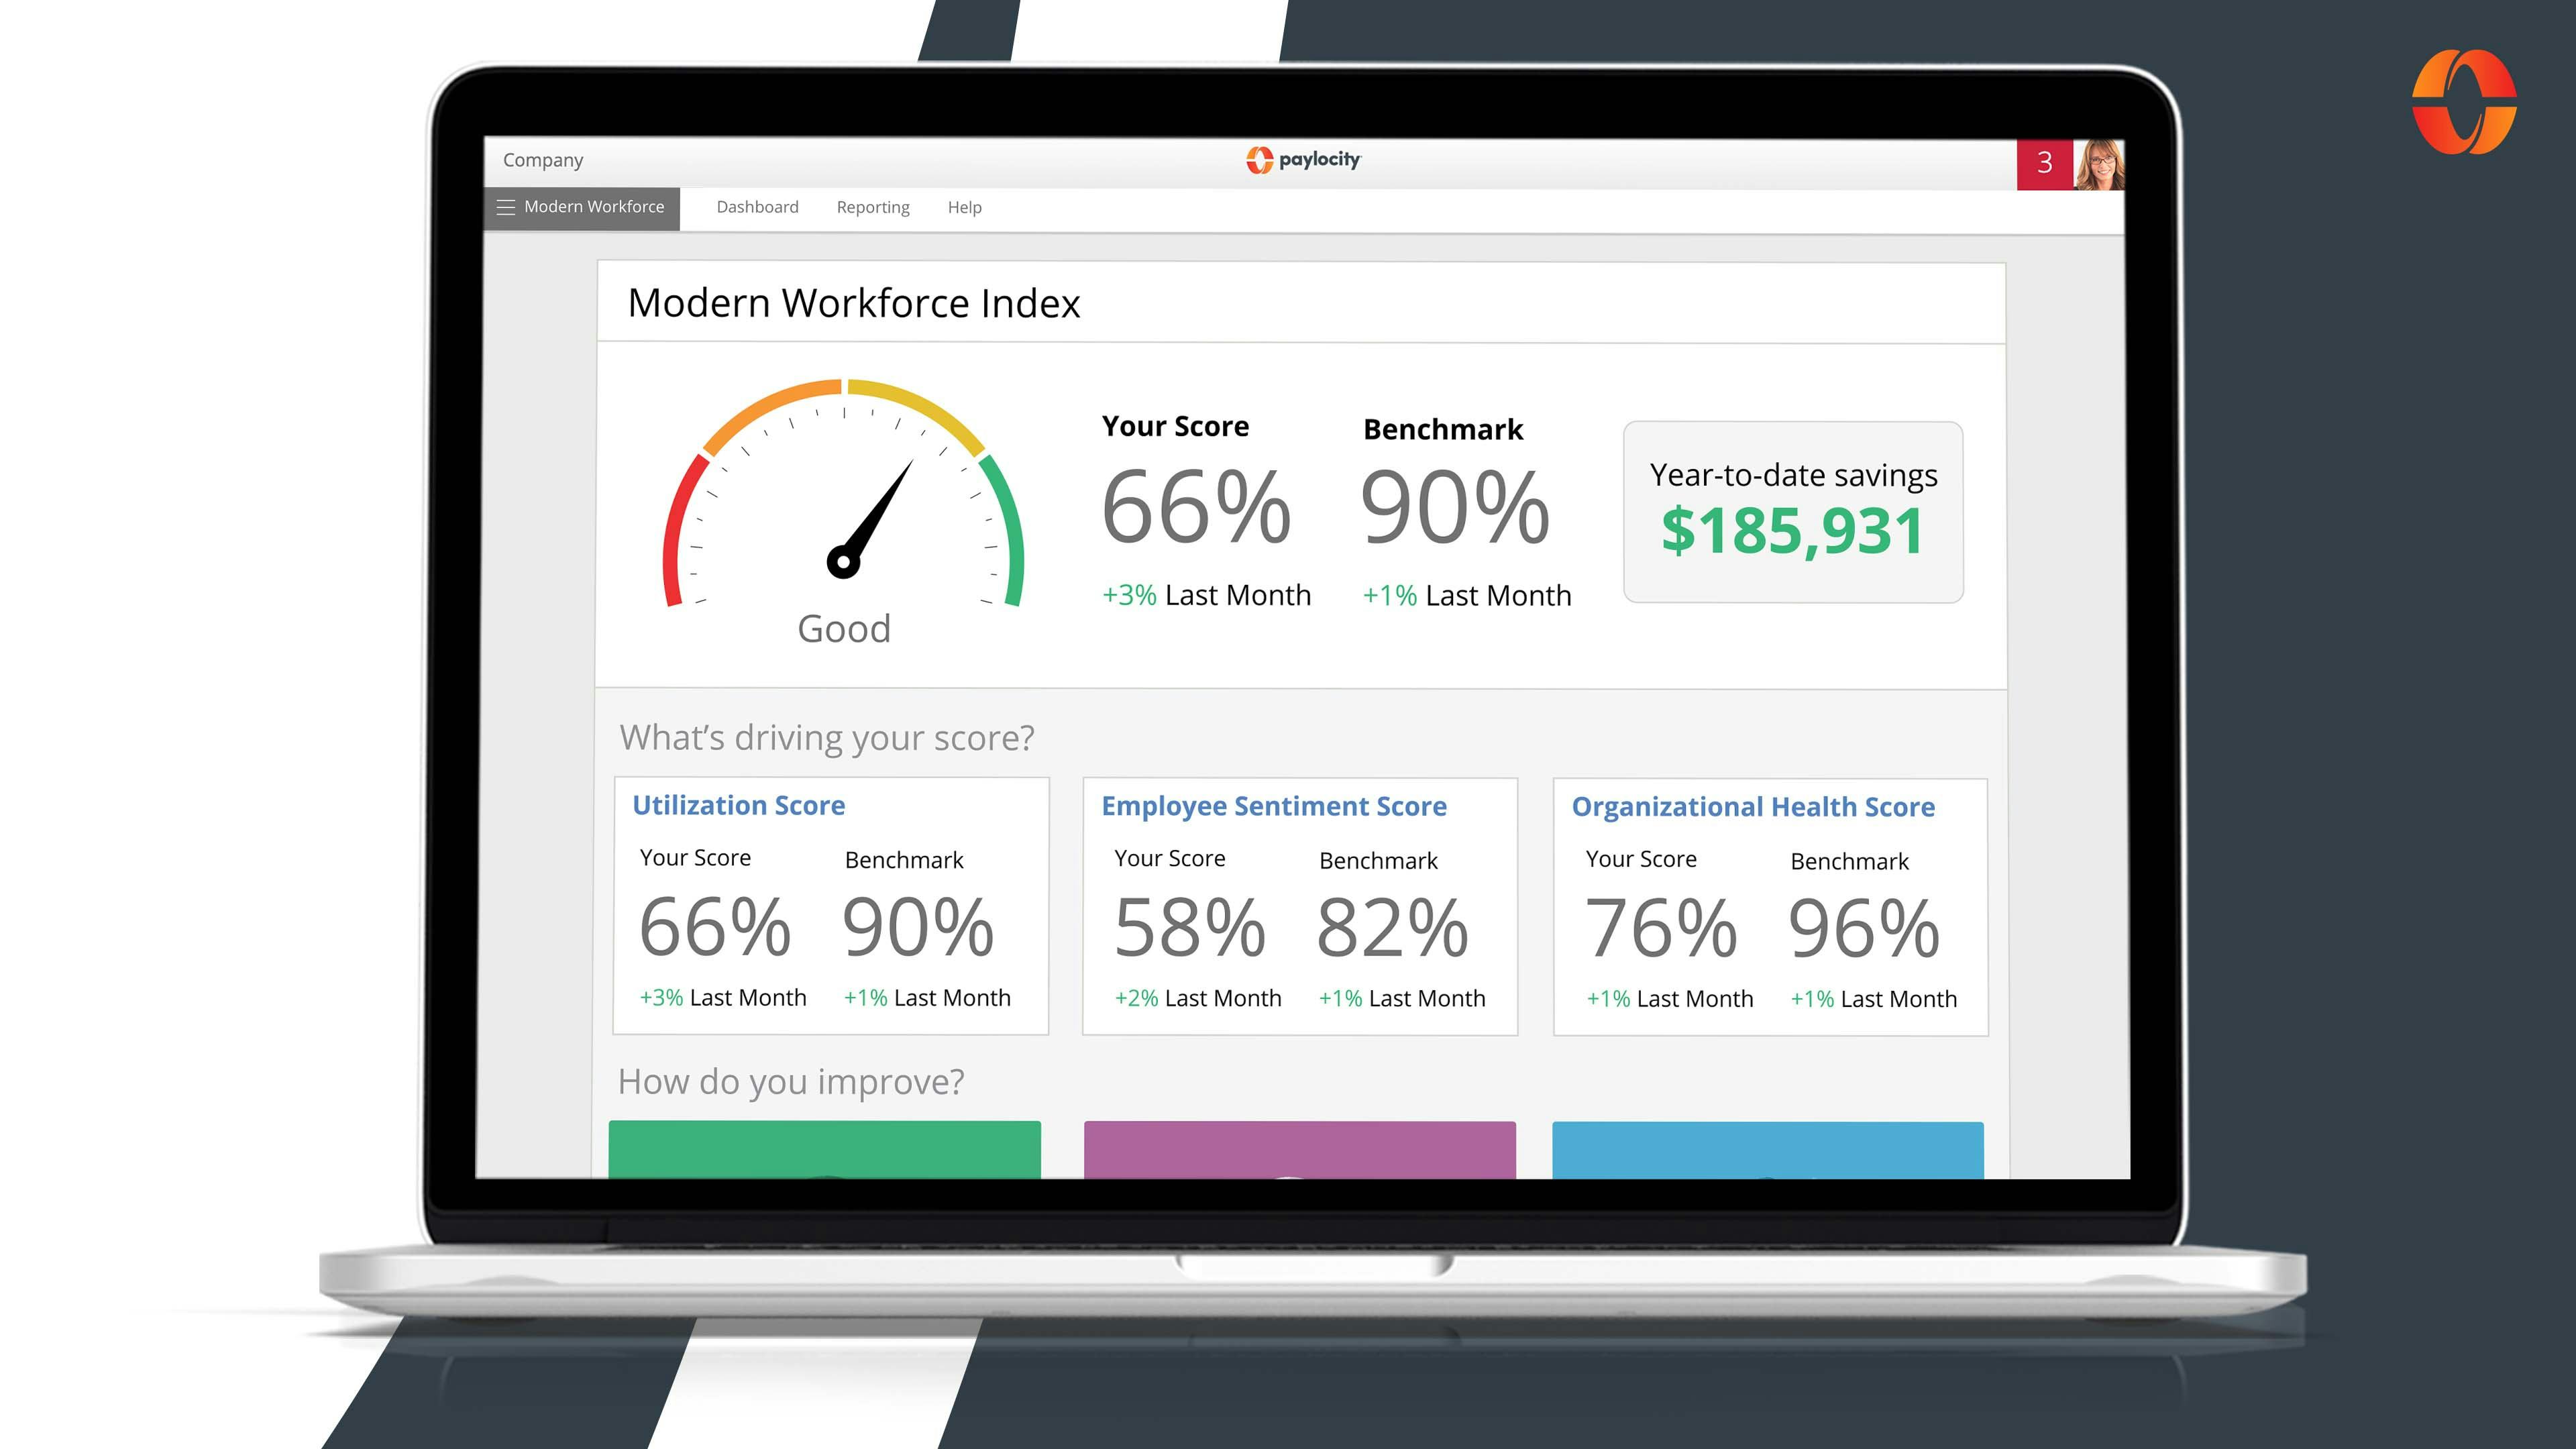 Paylocity Software - Paylocity's unified dashboard shows you how well you're doing with step-by-step ways to improve. See your overall score and compare your performance to peers - then, breakdown results across utilization, employee sentiment, and organizational health.